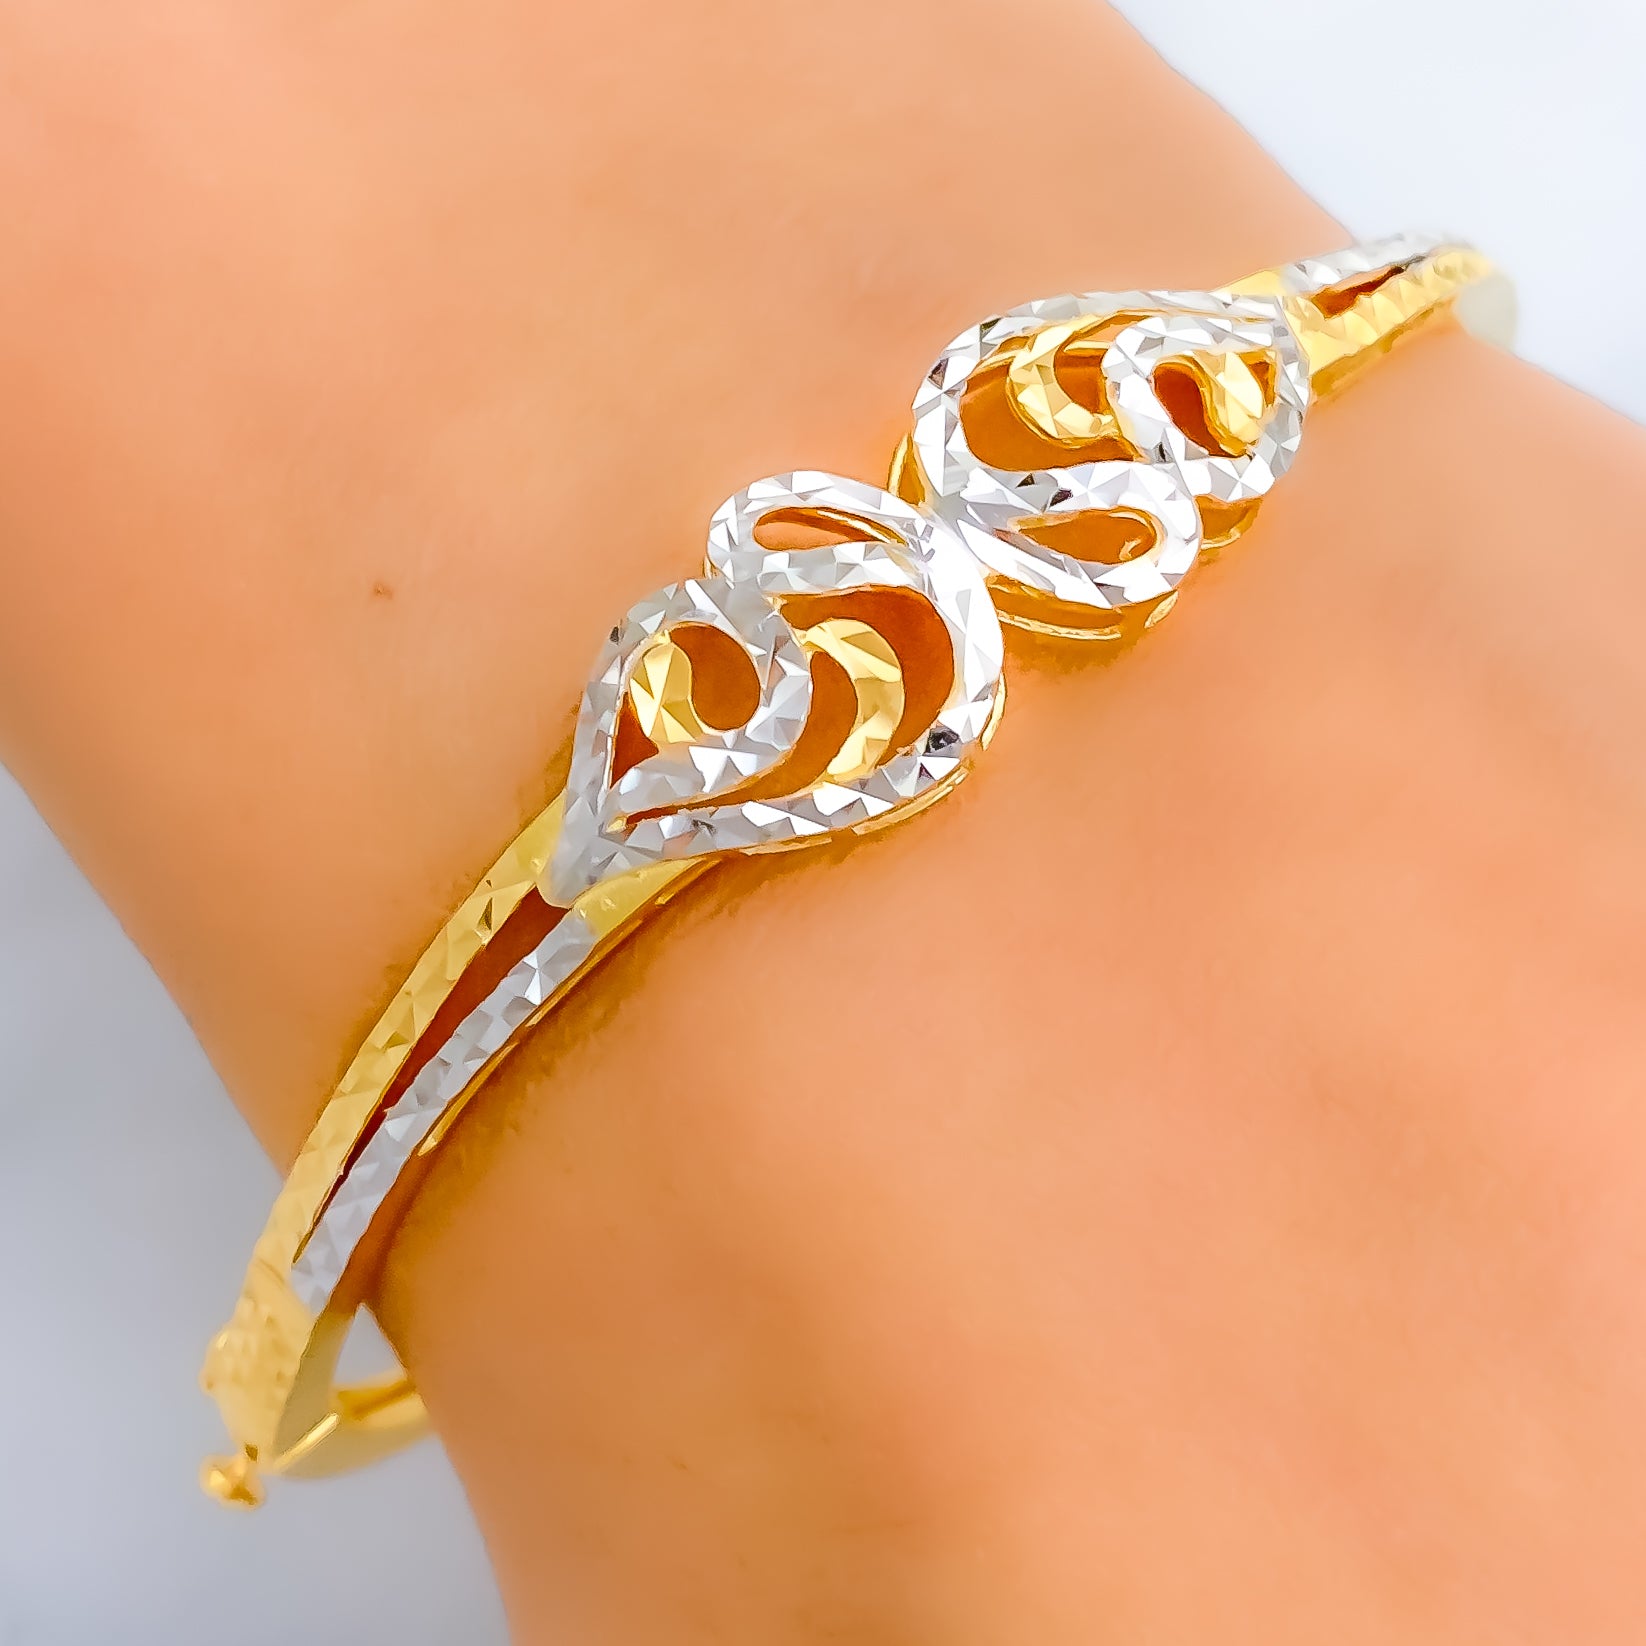 Gold, Silver or Rose Tone Twisted Bangle Bracelet With Trendy Knot Design,  Timeless Gift for Women, Ladies, Teens and Girls - Etsy